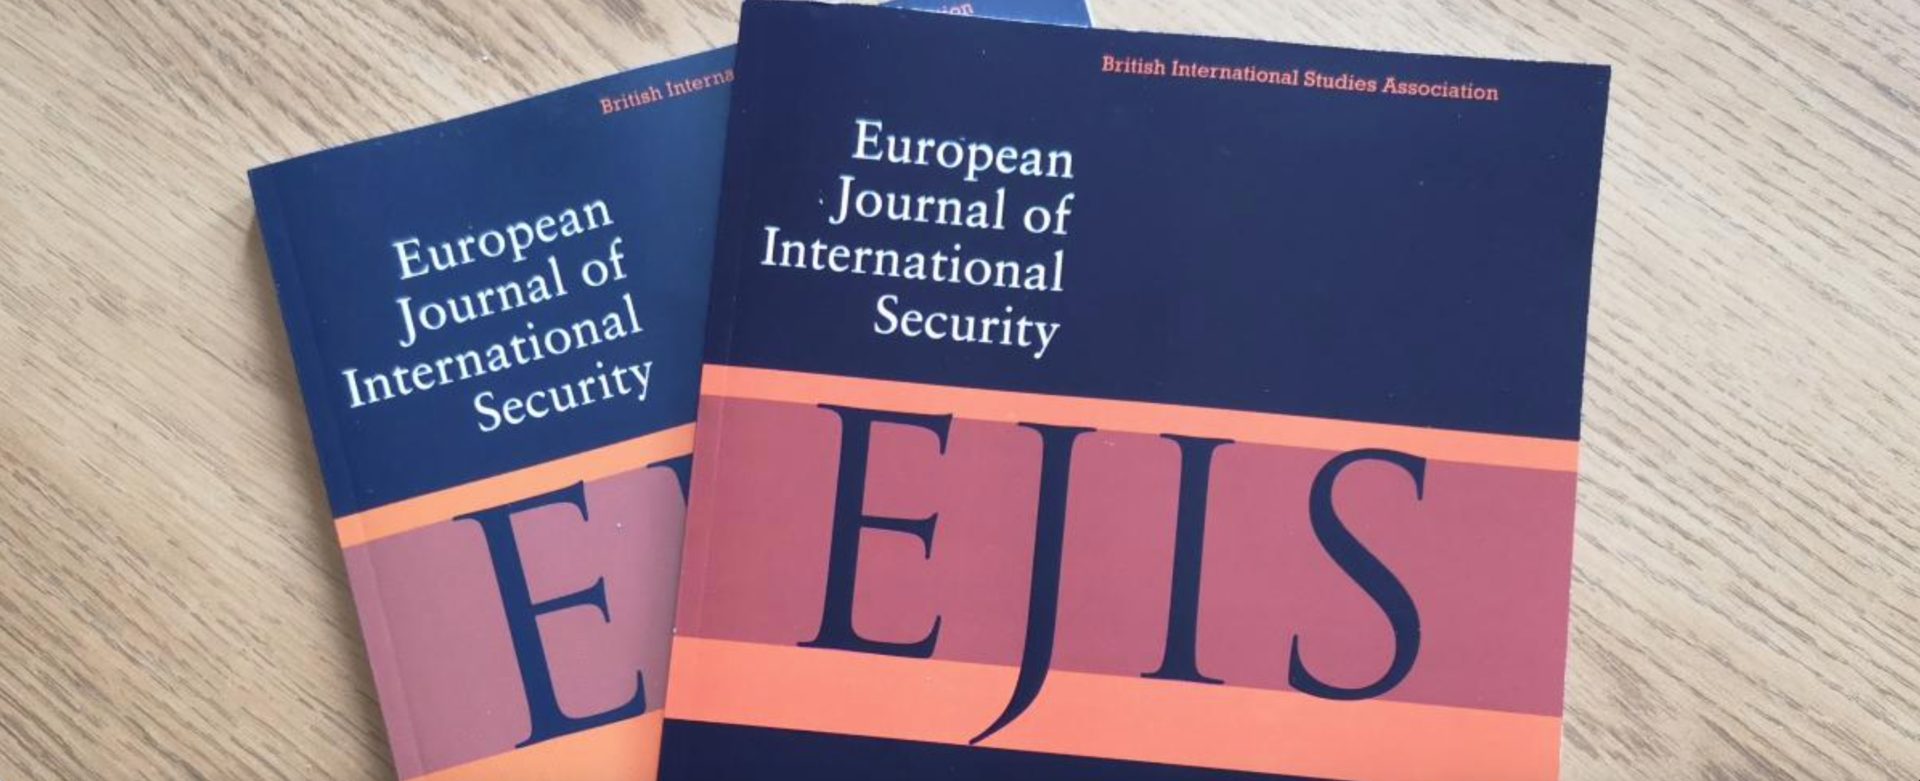 EJIS call for Special Issue proposals